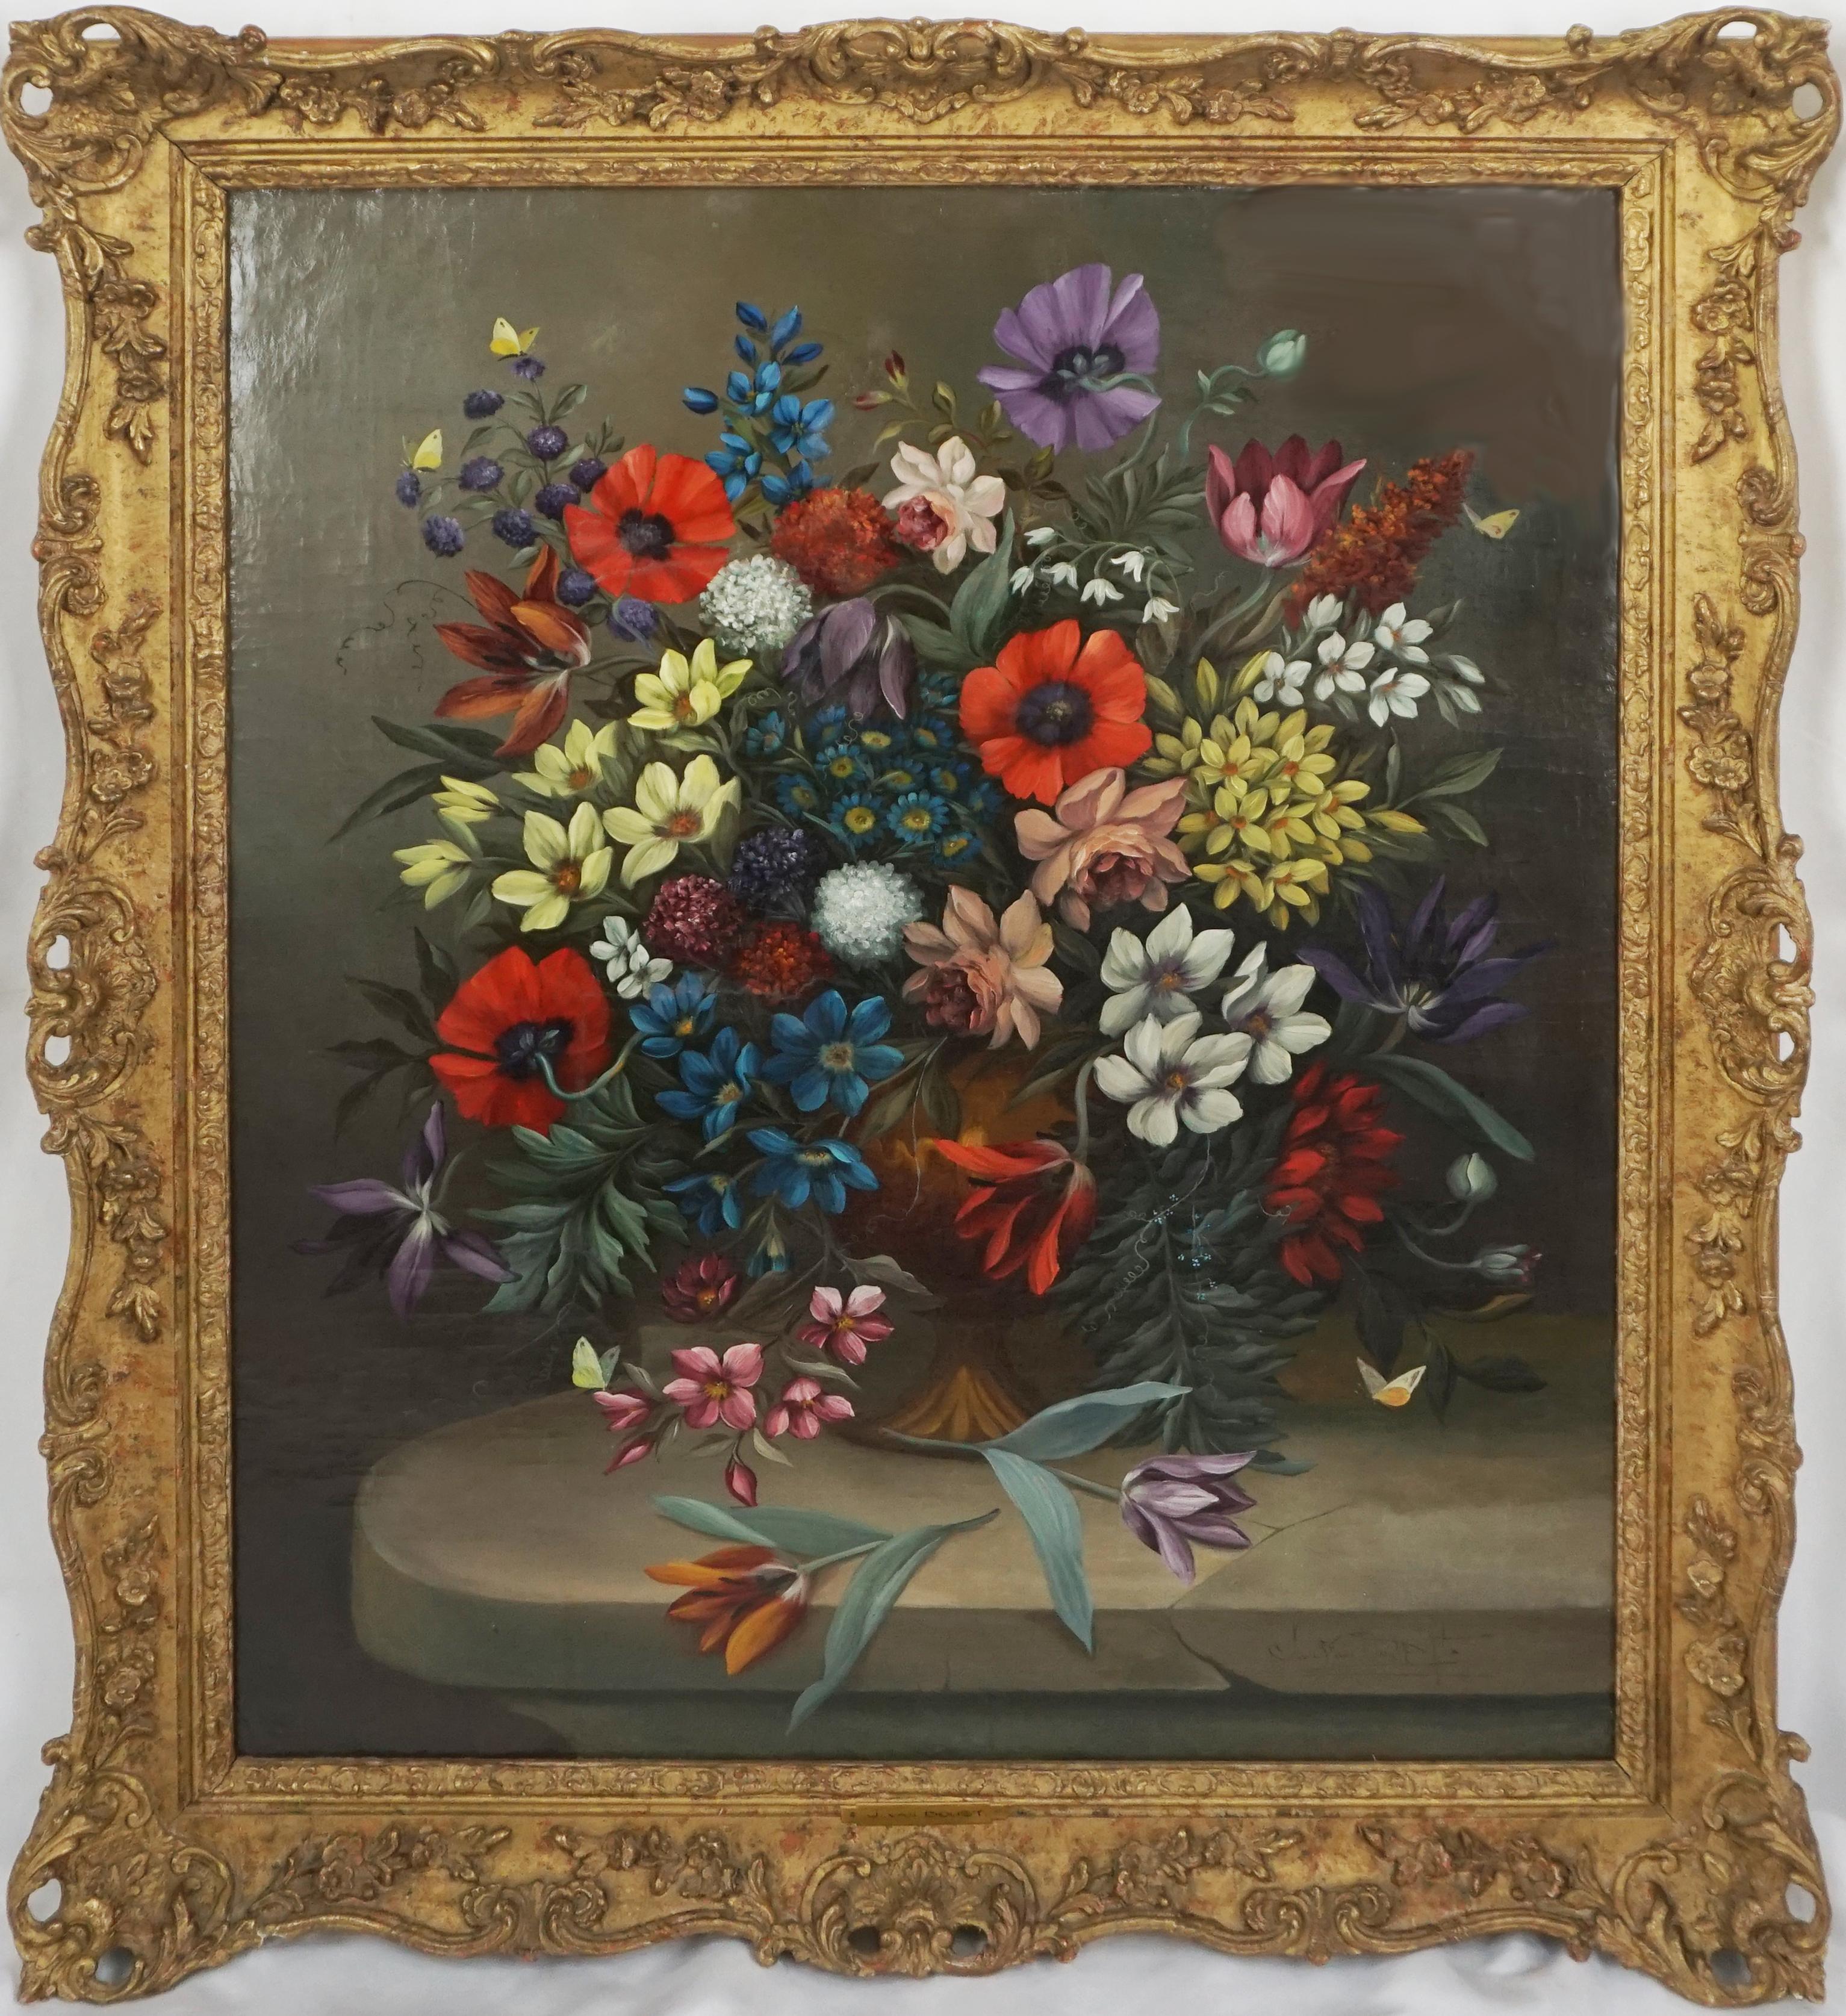 Jan Van Doust Interior Painting - Antique Dutch Floral Still Life with Tulips, Poppies and Butterflies